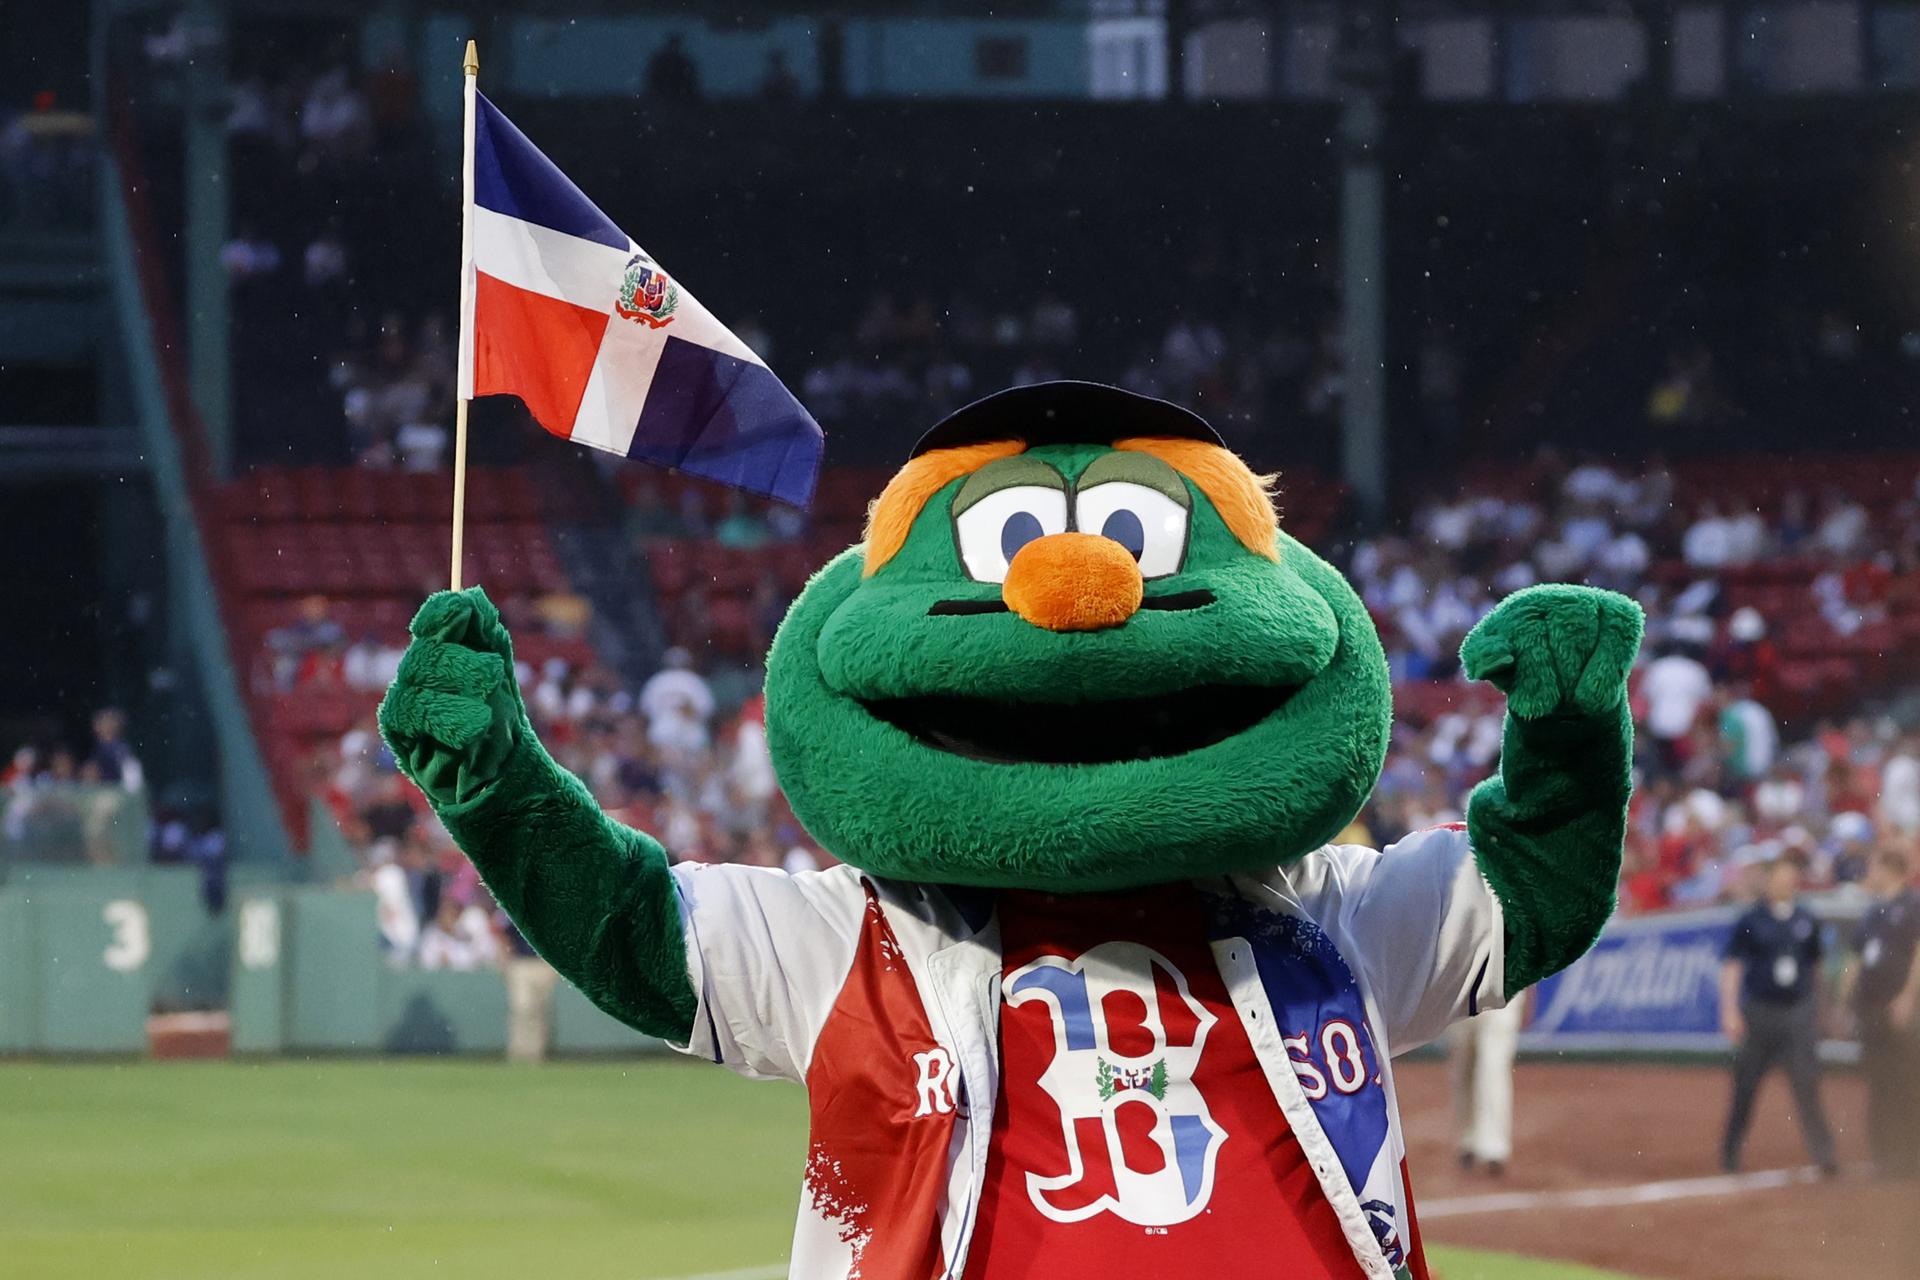 Wally the Green Monster in the Dominican Republic